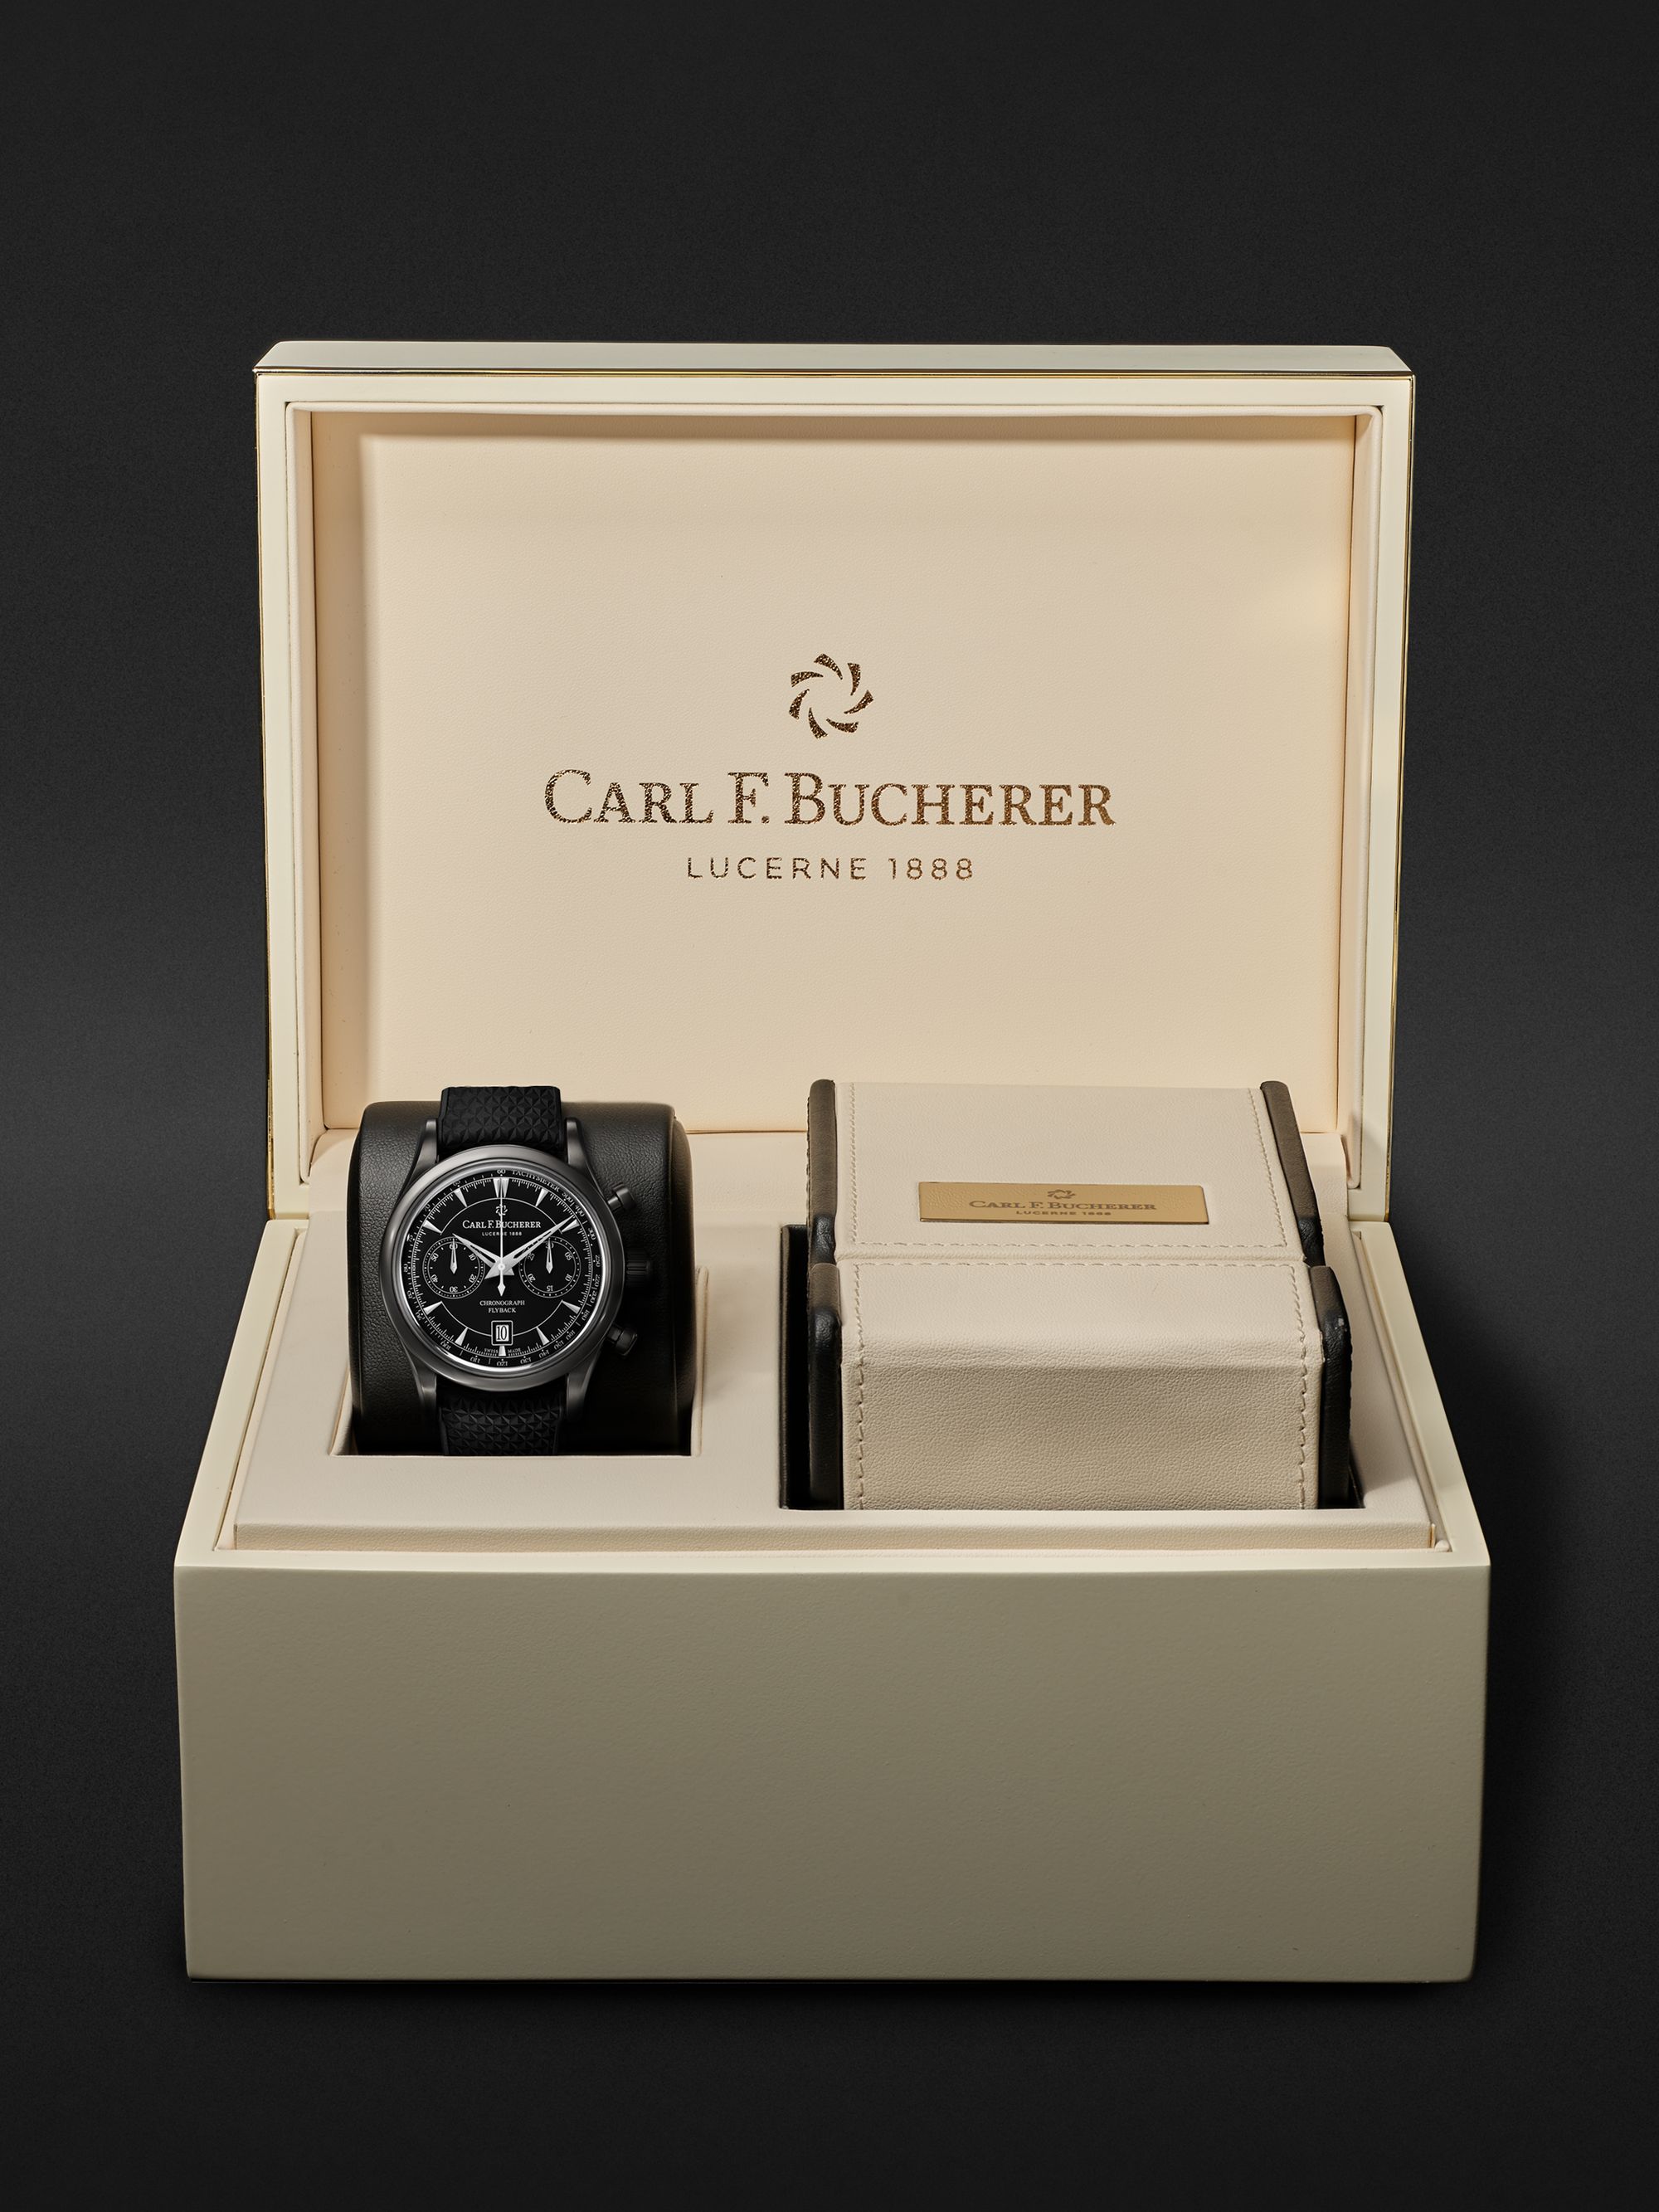 CARL F. BUCHERER Manero Automatic Flyback Chronograph 43mm Steel and Rubber Watch, Ref. No. 00.10919.12.33.01